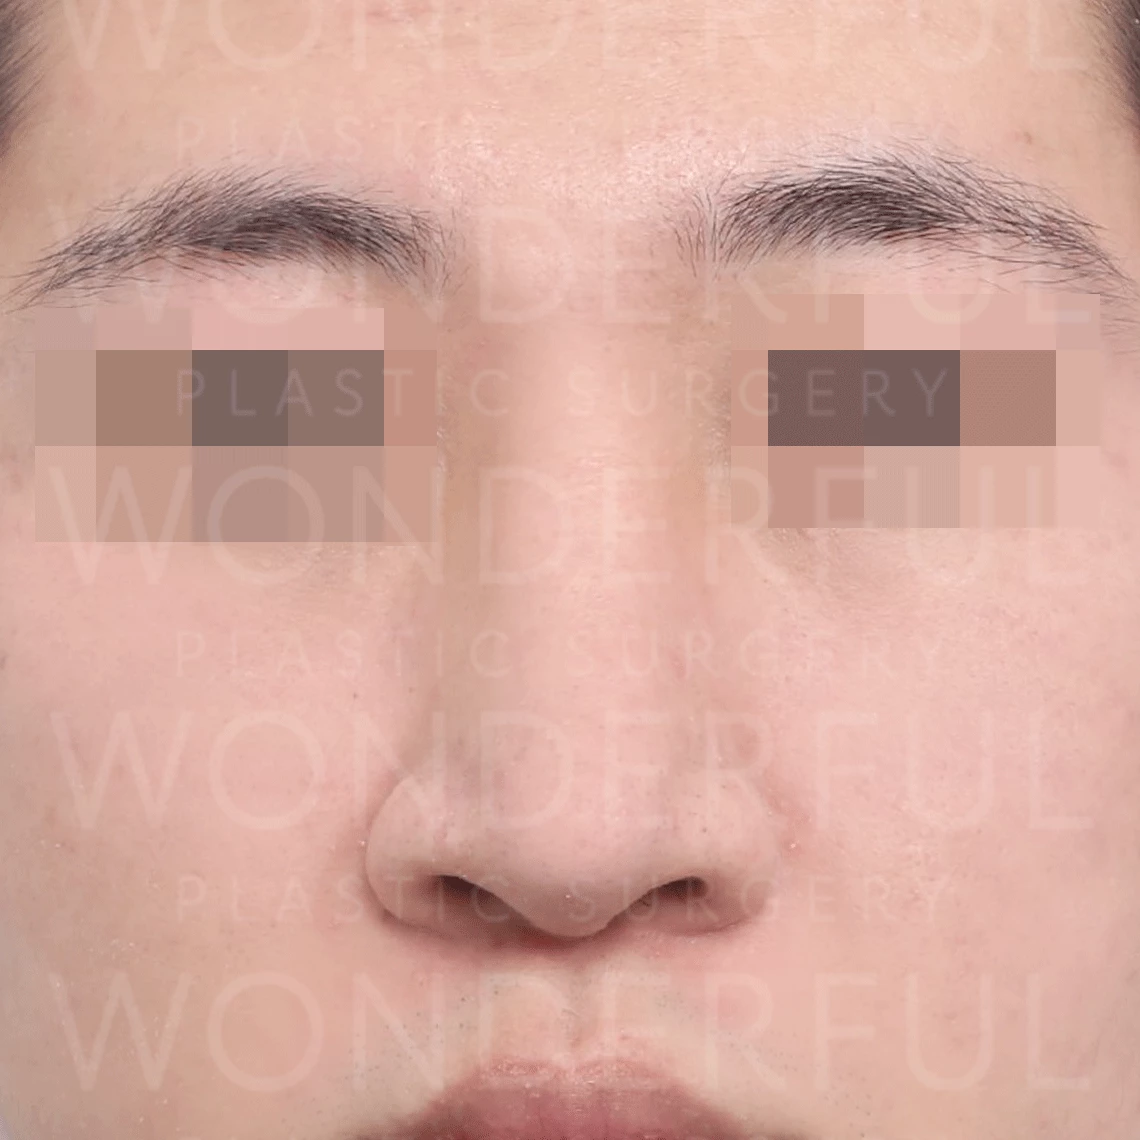 wonderful-plastic-surgery-hospital-korea-wide-nose-rhinoplasty-before-after-results-before-1